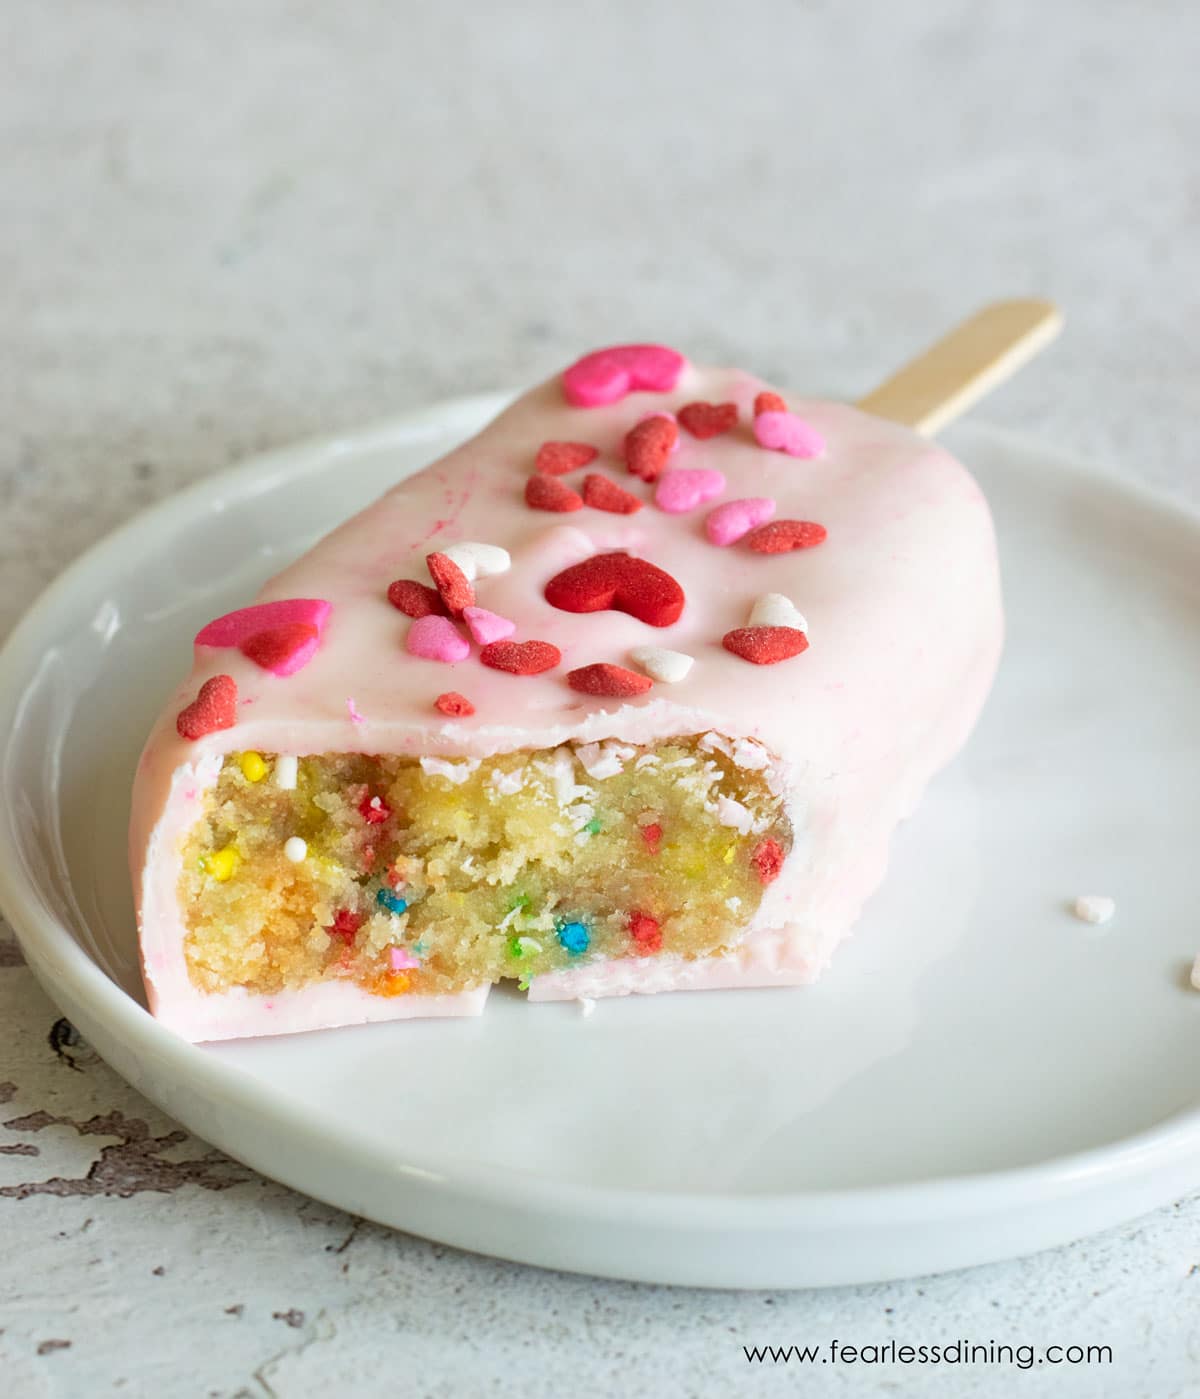 A pink candy coated funfetti cakesicle on a plate.